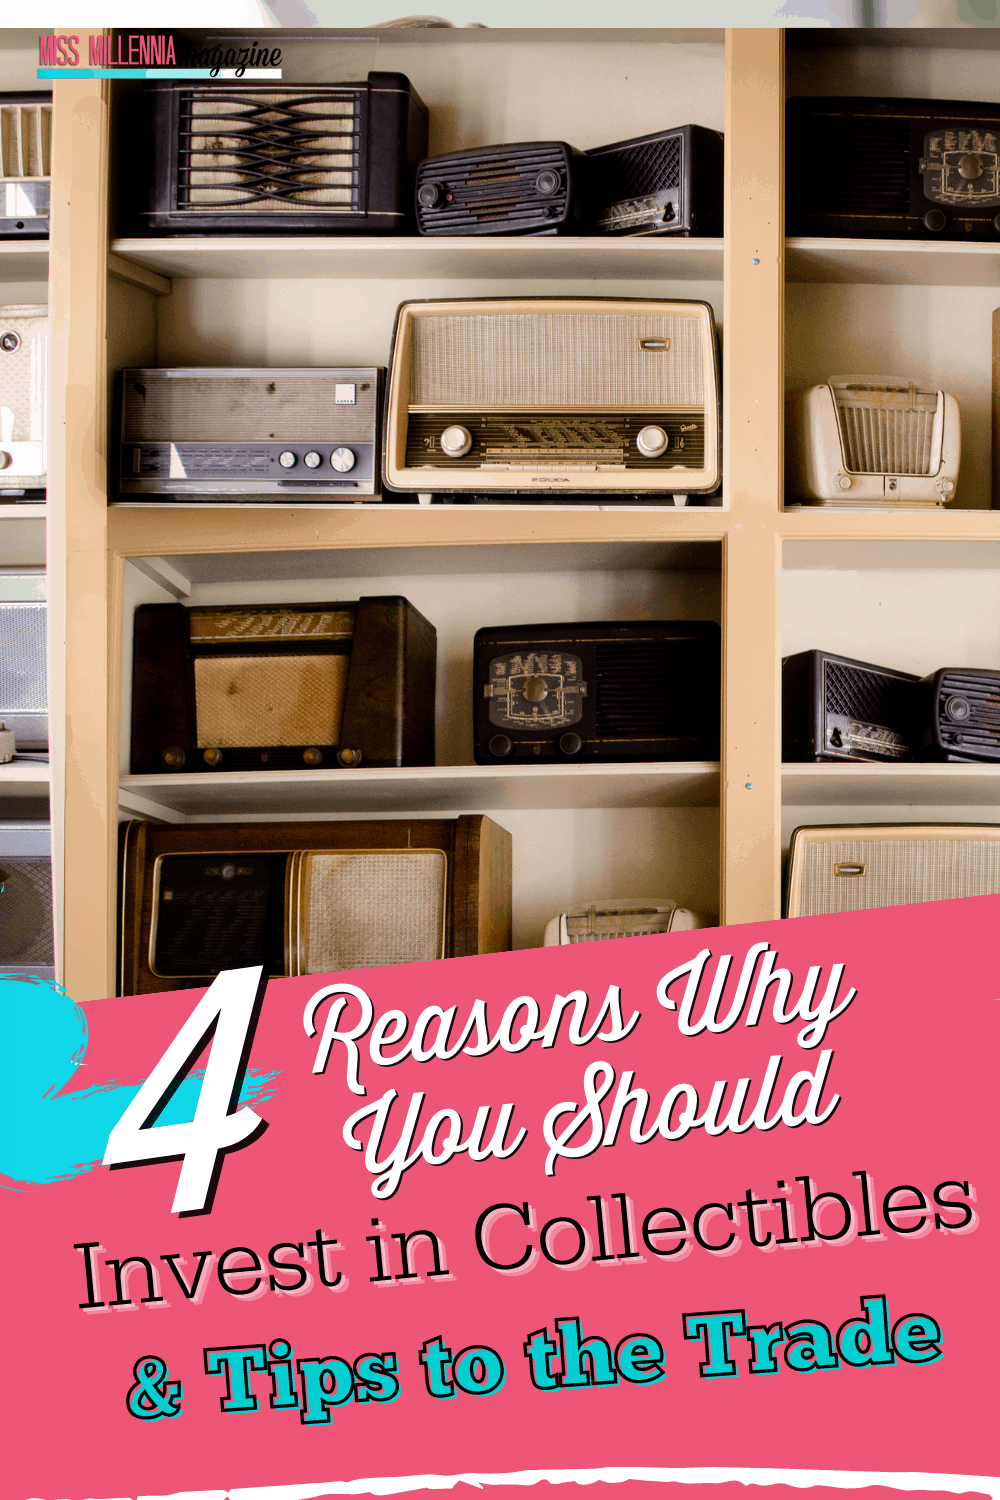 4 Reasons Why You Should Invest In Collectibles & Tips to the Trade!